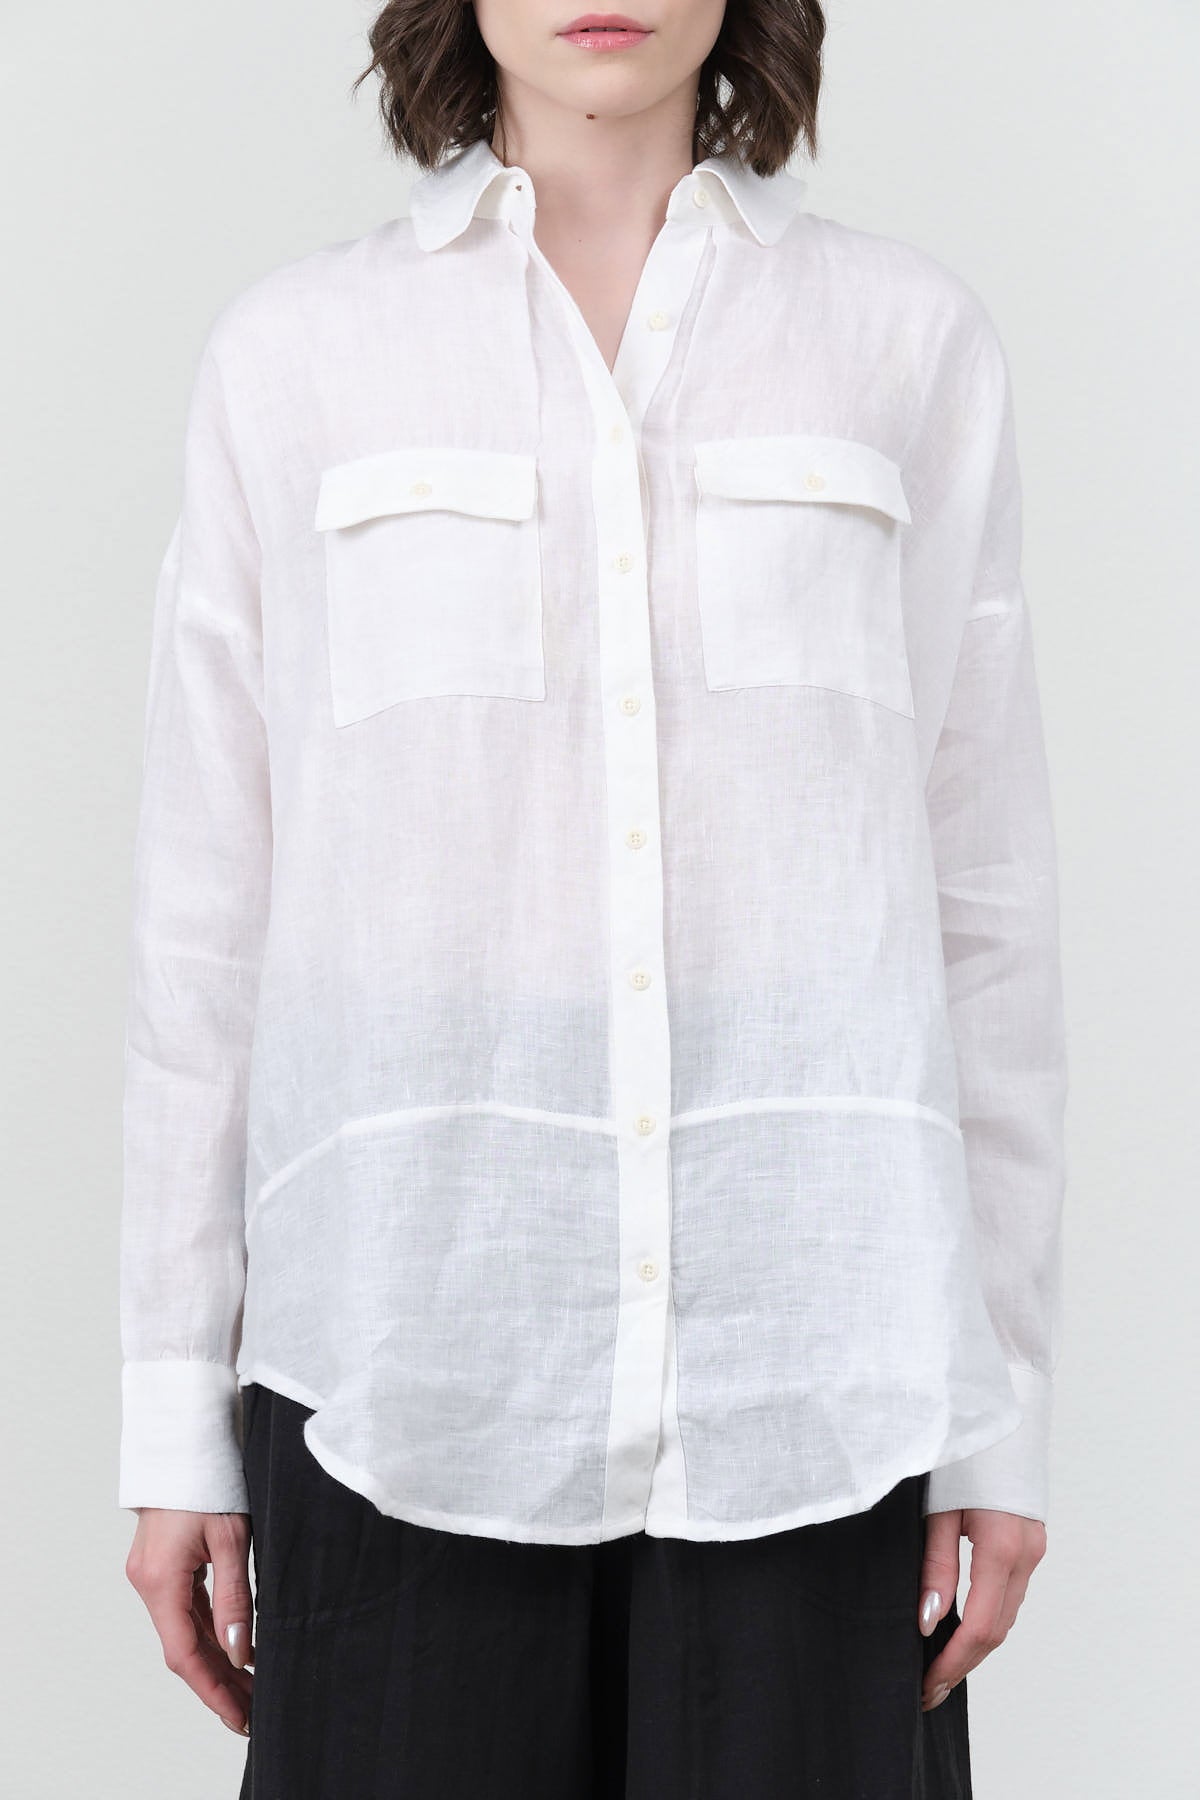 Kyoto Blouse by Mirth in White Linen 